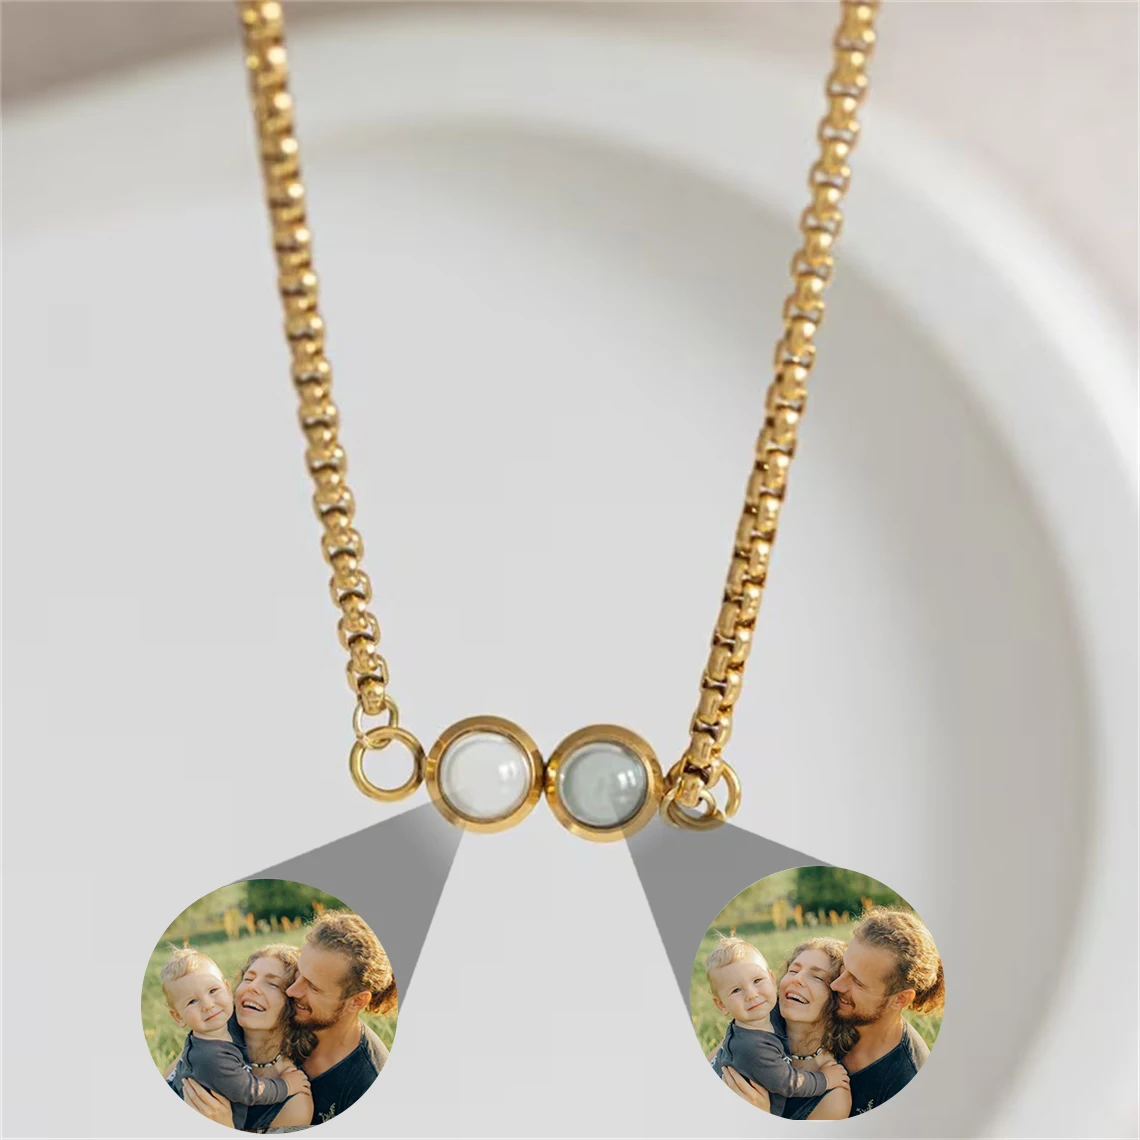 Personalized Custom Photo Projection Necklace Double Round Photo Projection Necklace For Men Women Stainless Steel Pendant Gift